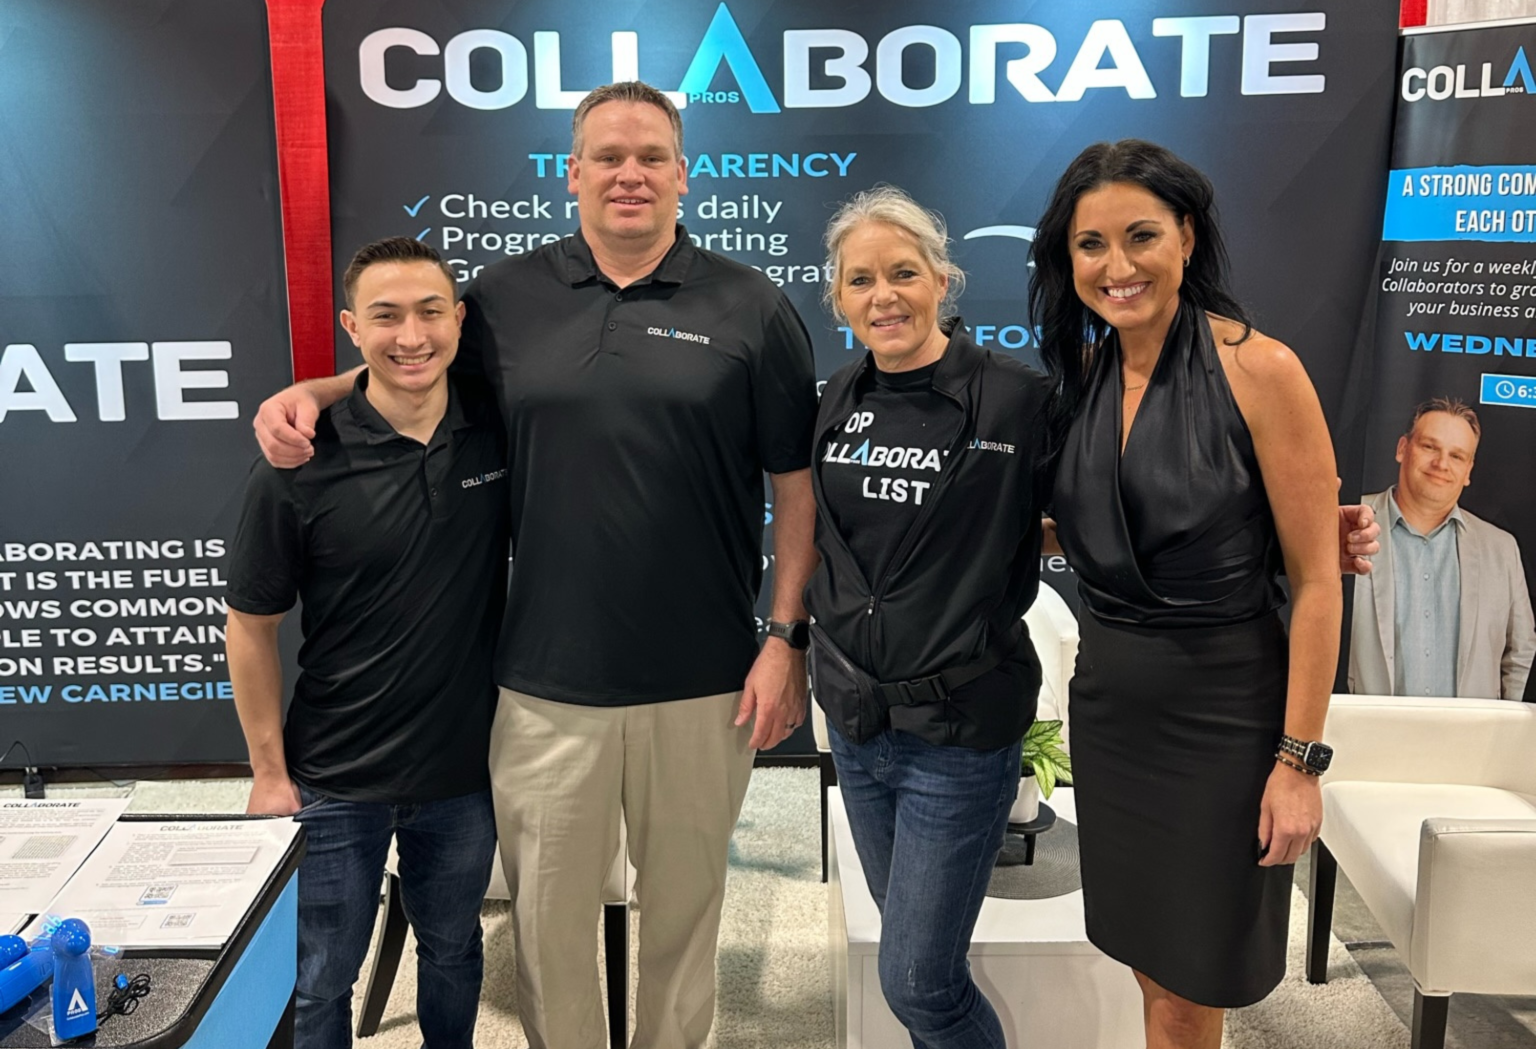 David Kaminski and Angela Schroeder with two others at a Collaborate event - collaborate pros